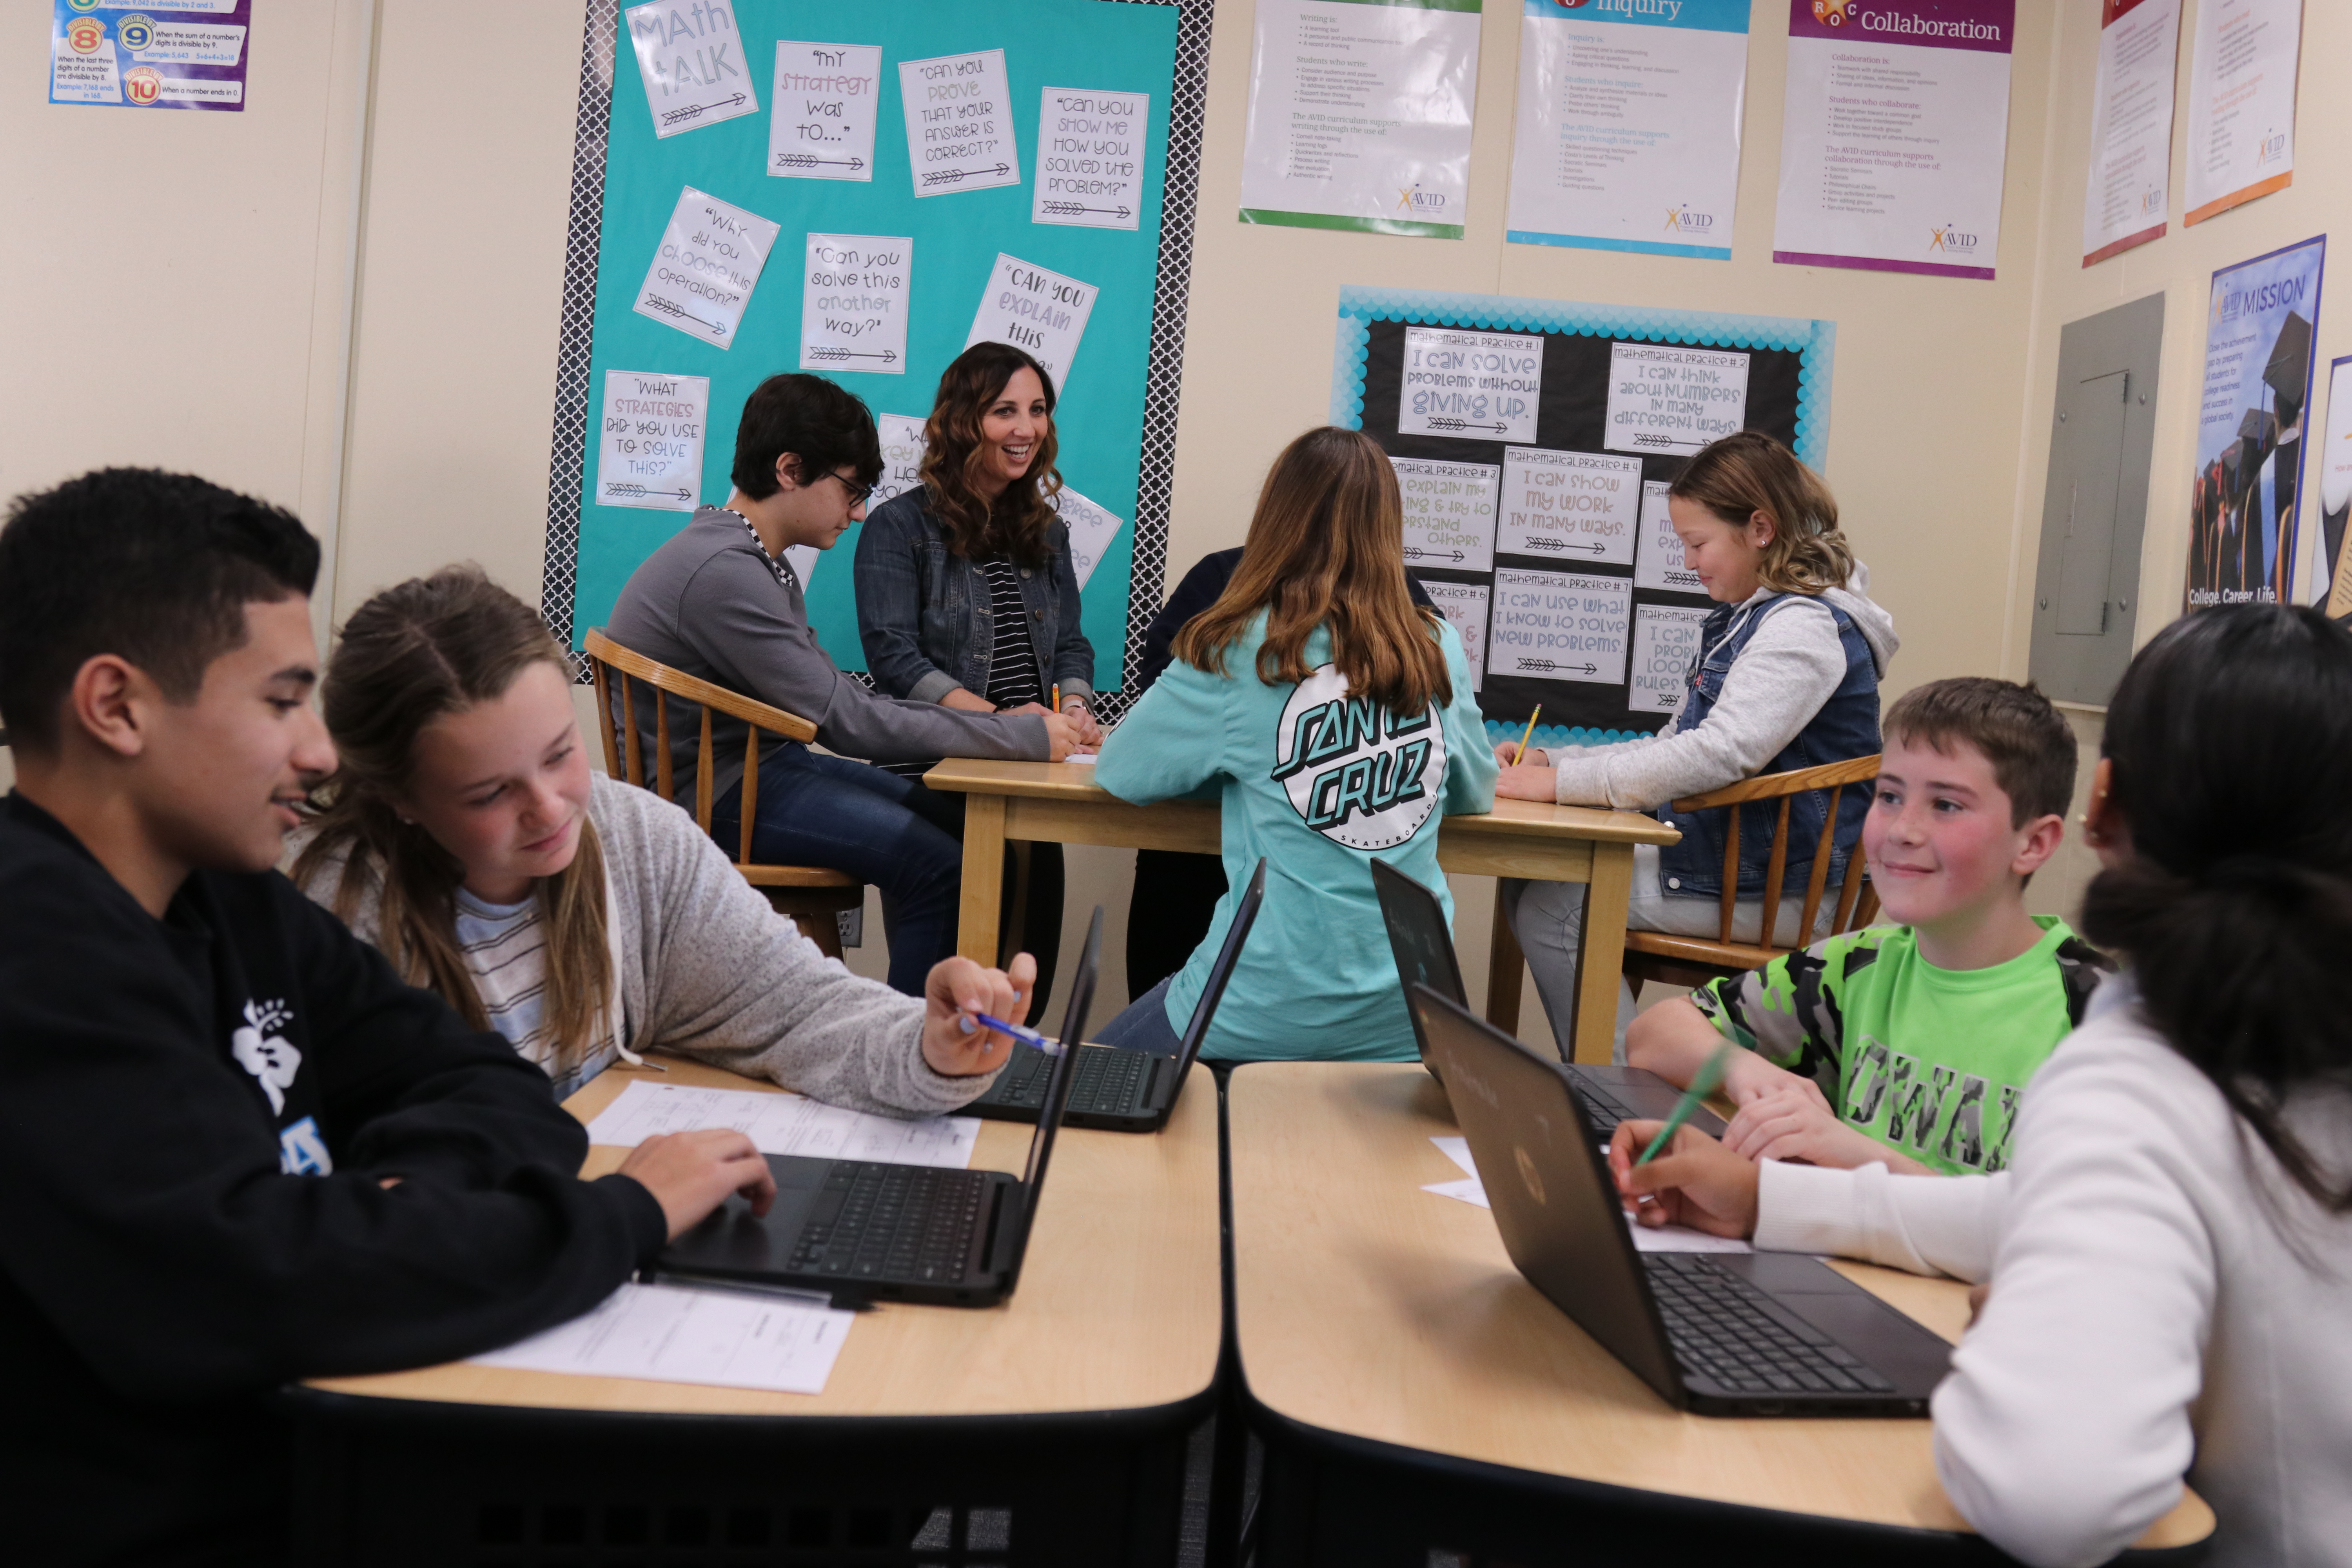 Collaboration and blended learning in flexible seating environments is one of the main tenets of Poway USD’s Voyager ed tech professional development program, which gives teachers more opportunities for small-group and one-on-one interactions with their students.